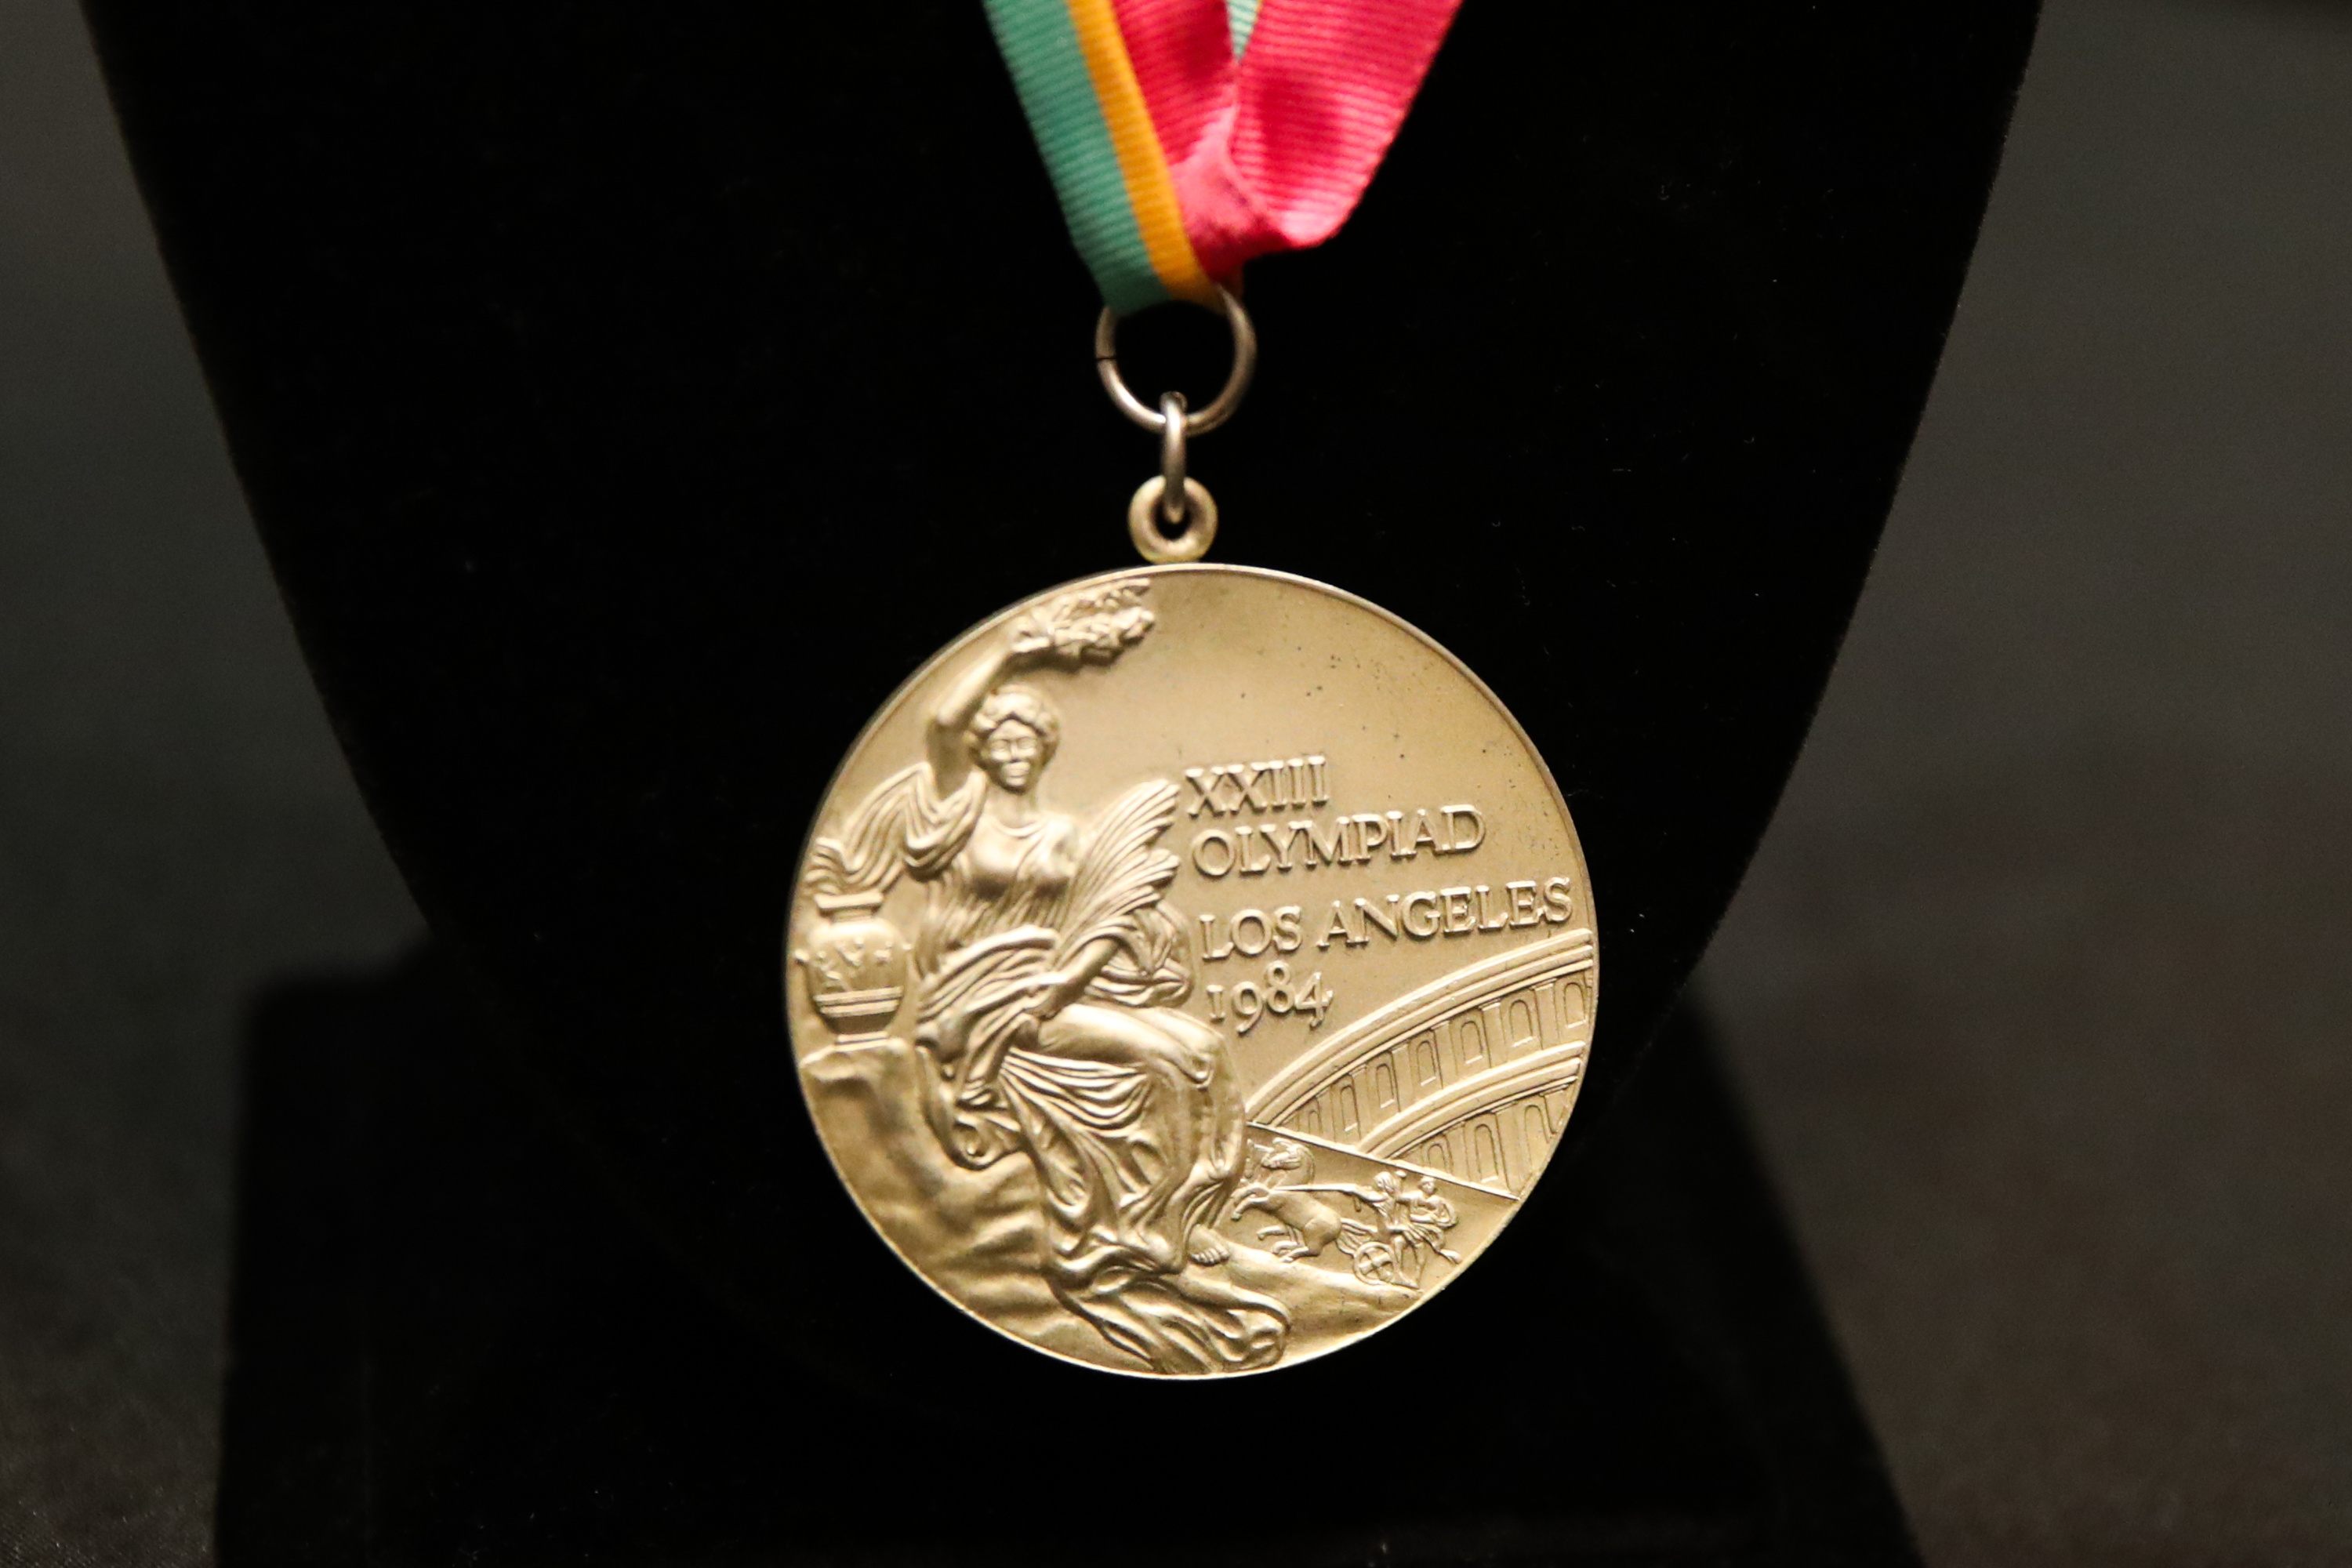 Gold medal from 1984 Olympics, US Olympic Basketball Team, Sports memorabilia, Valuable collectibles, 3000x2000 HD Desktop